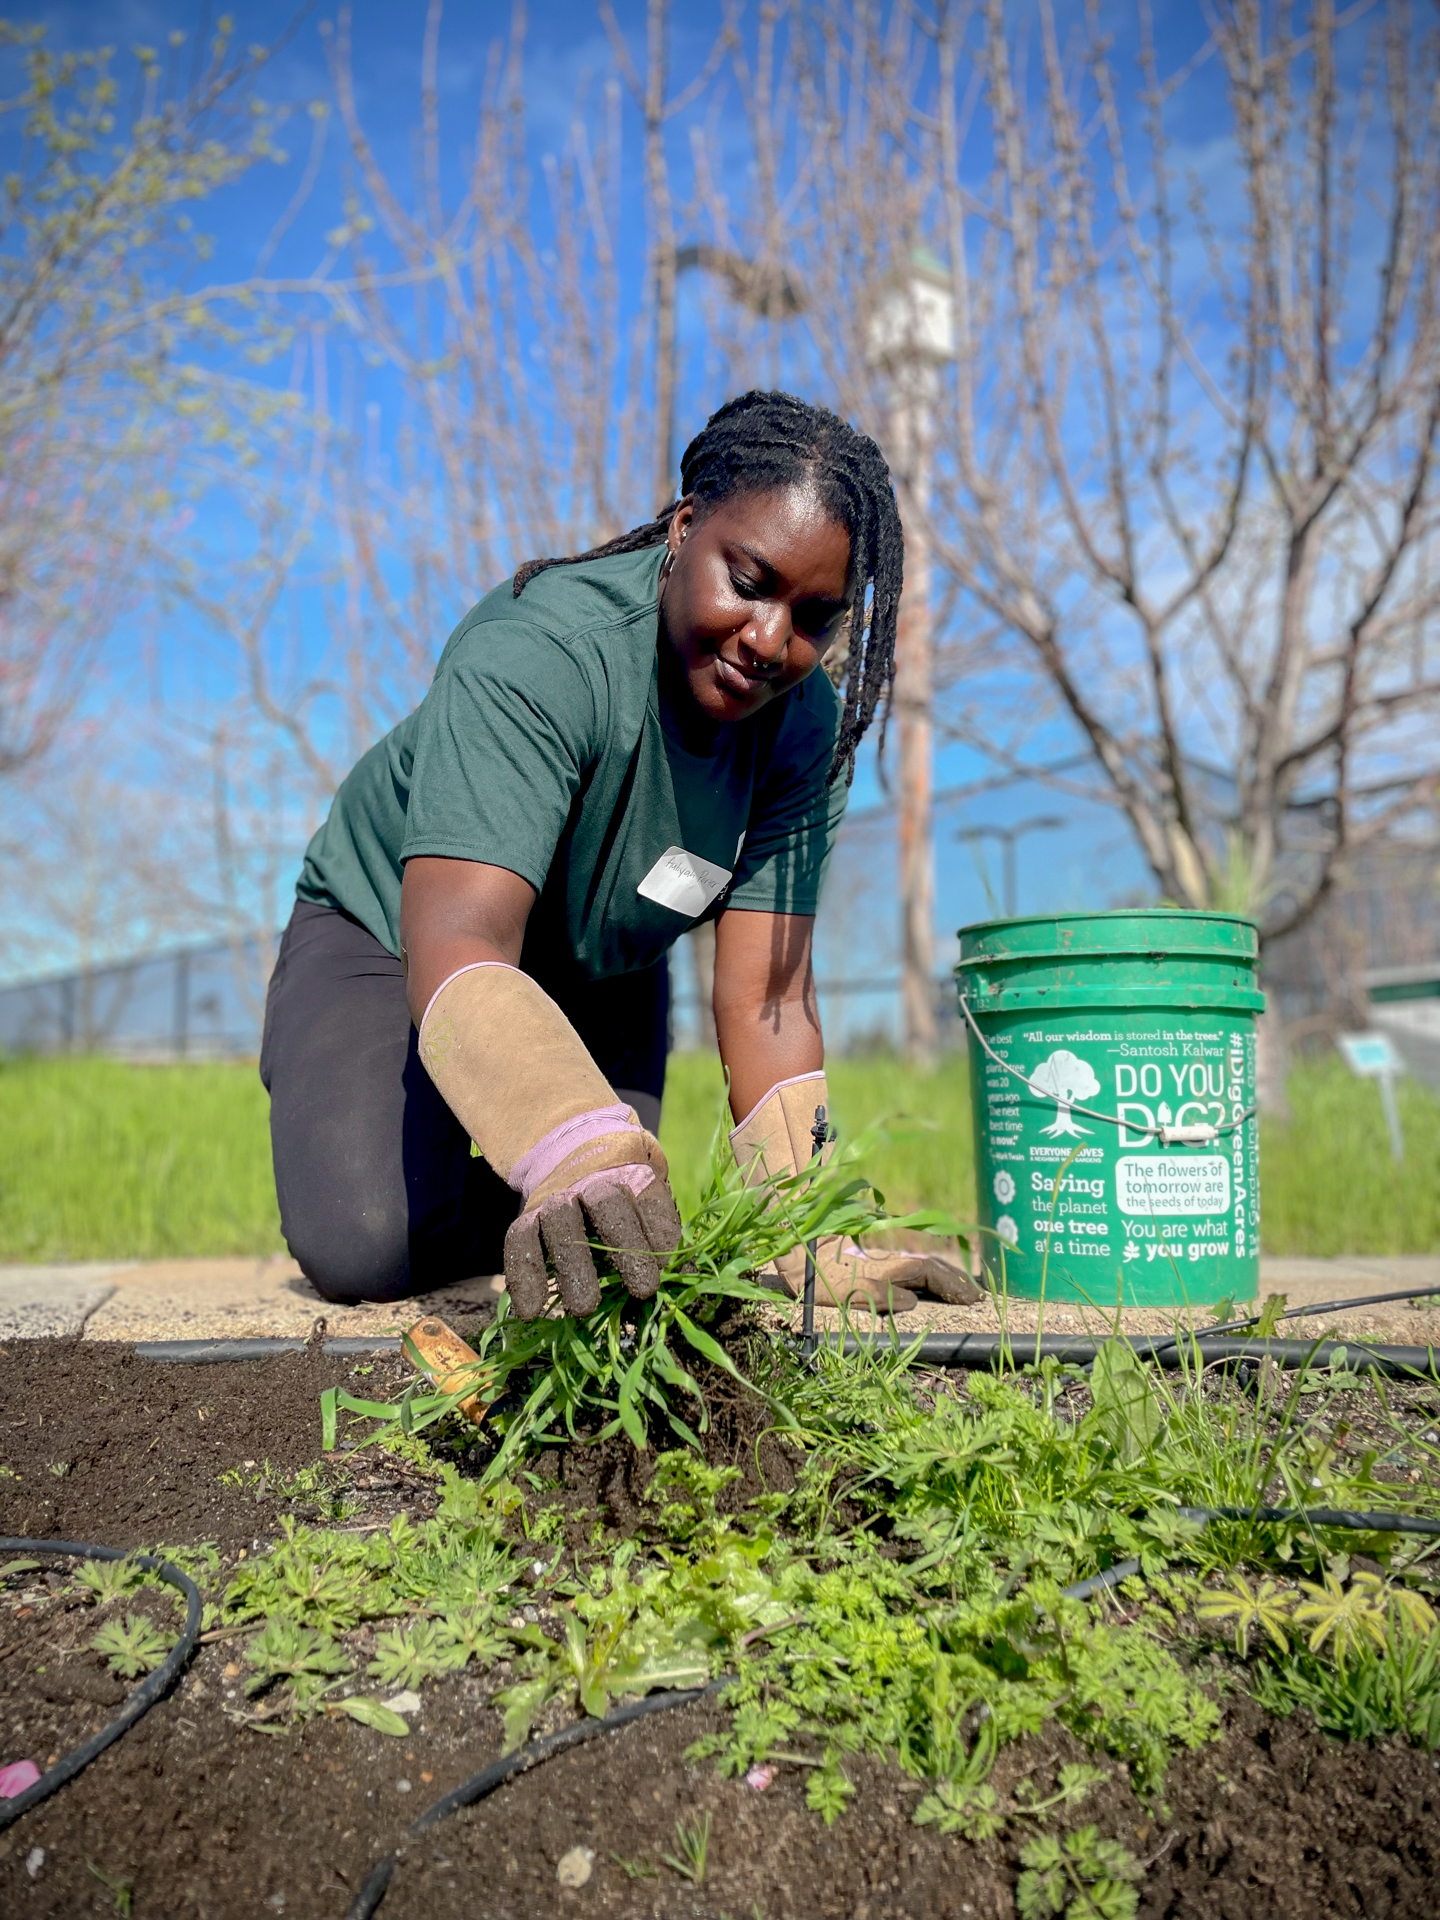 A woman, outdoors, wearing a green shirt and gardening gloves, working in a garden bed